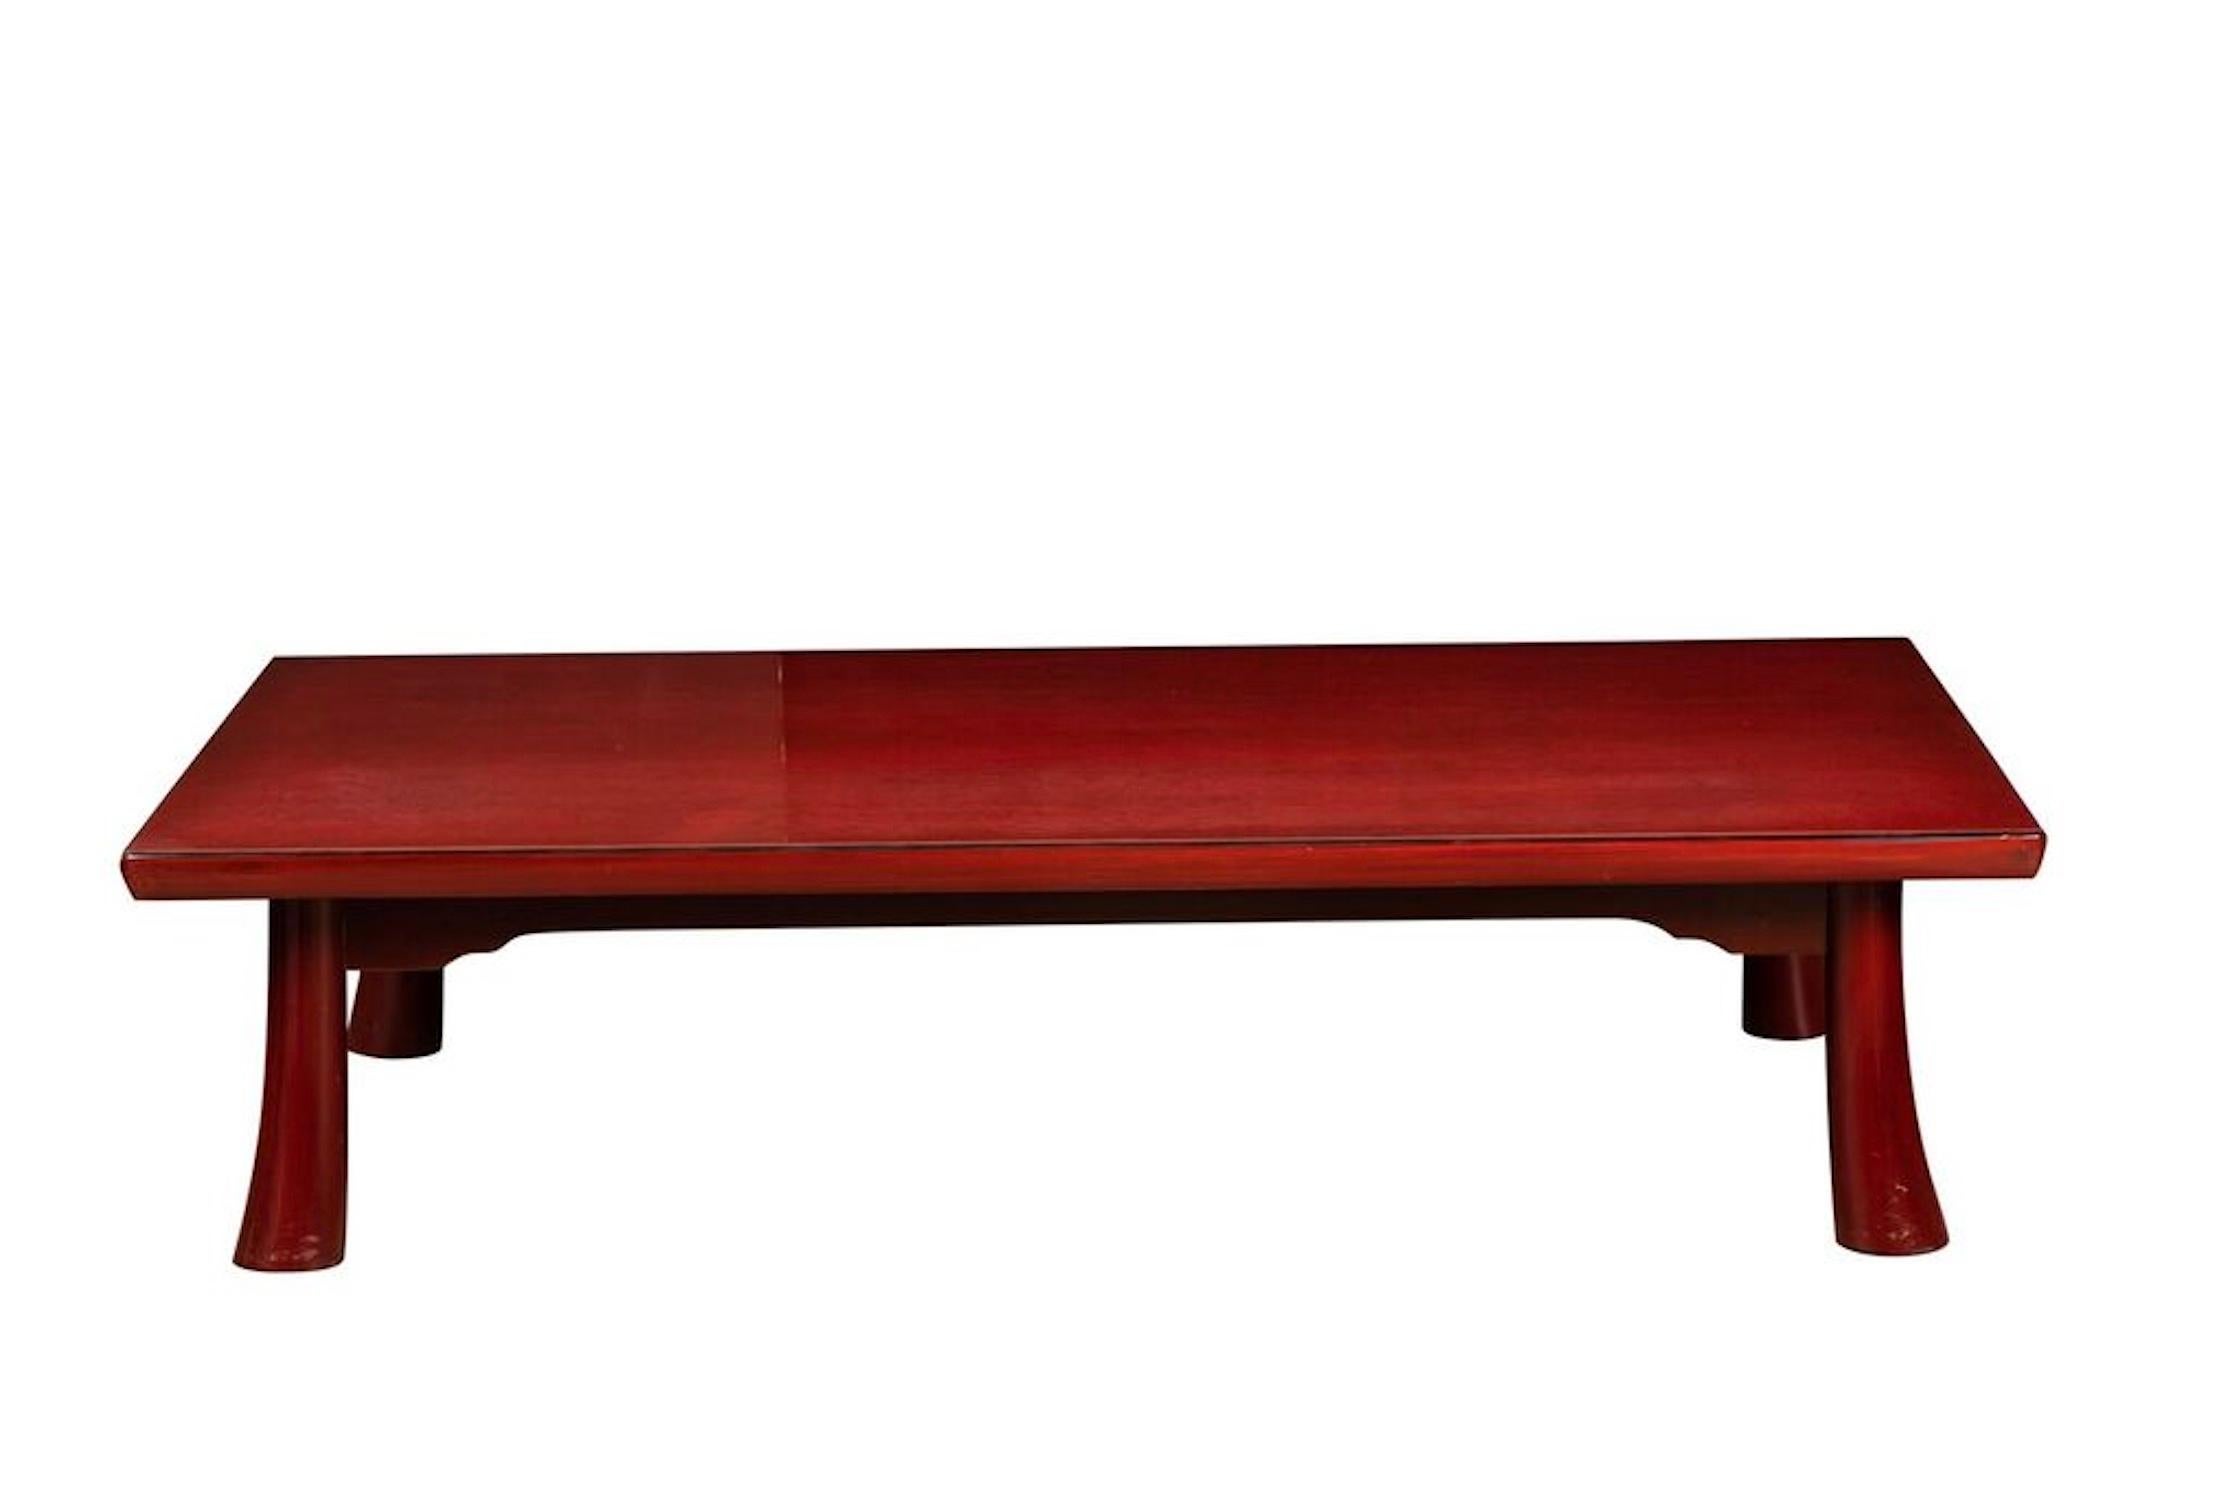 Vintage Japanese coffee table in the style of 19th century Japanese 'Wakasa' tables. Made by Gumps, San Francisco 1960s. 'Oxblood' color lacquer.